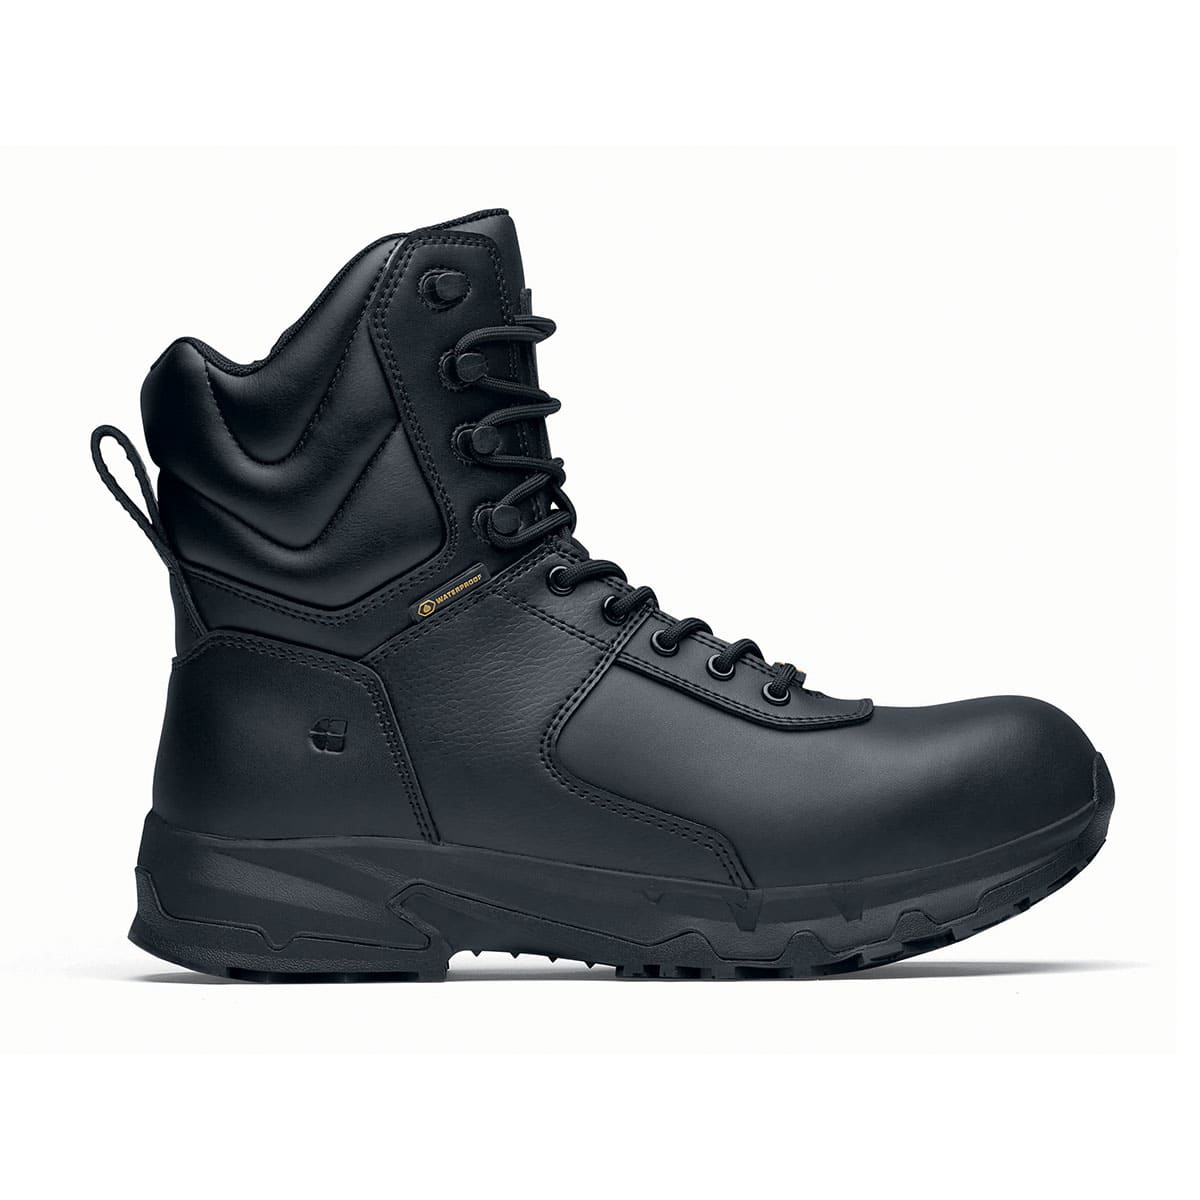 The Guard High from Shoes For Crews are waterproof slip-resistant safety boots with a safety toe cap, seen from the right.